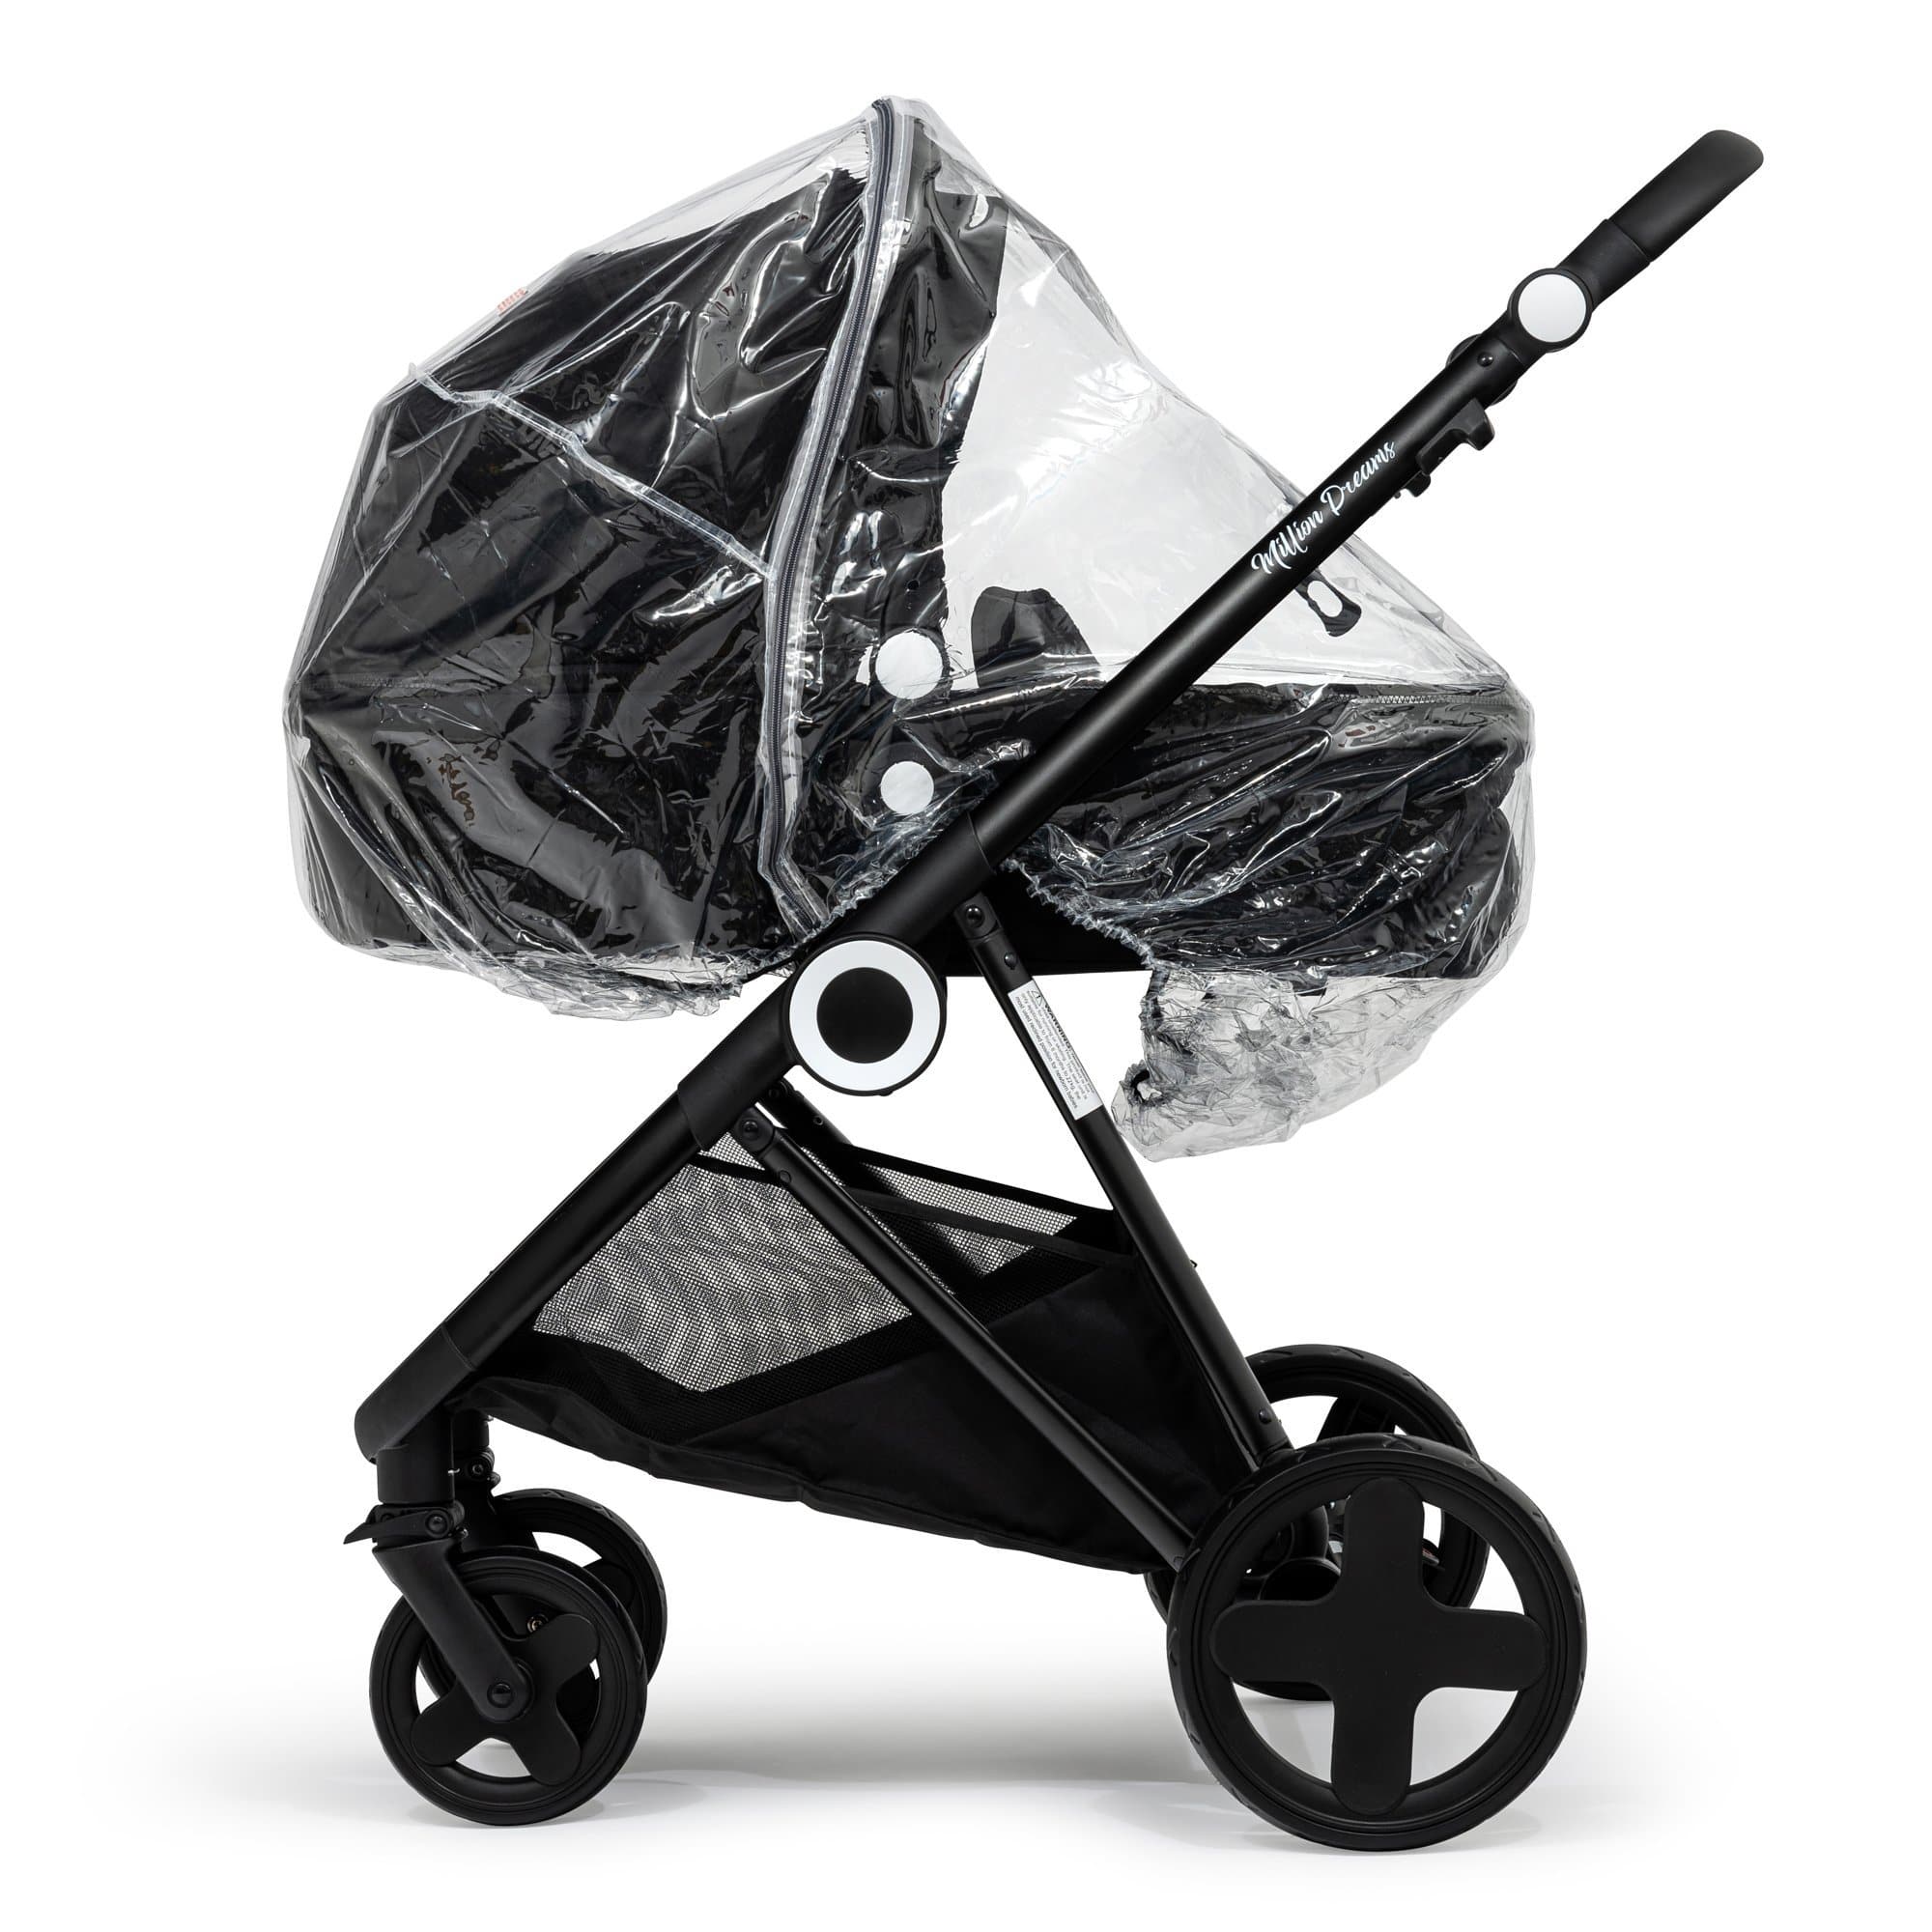 2 in 1 Rain Cover Compatible with Unilove - Fits All Models - For Your Little One